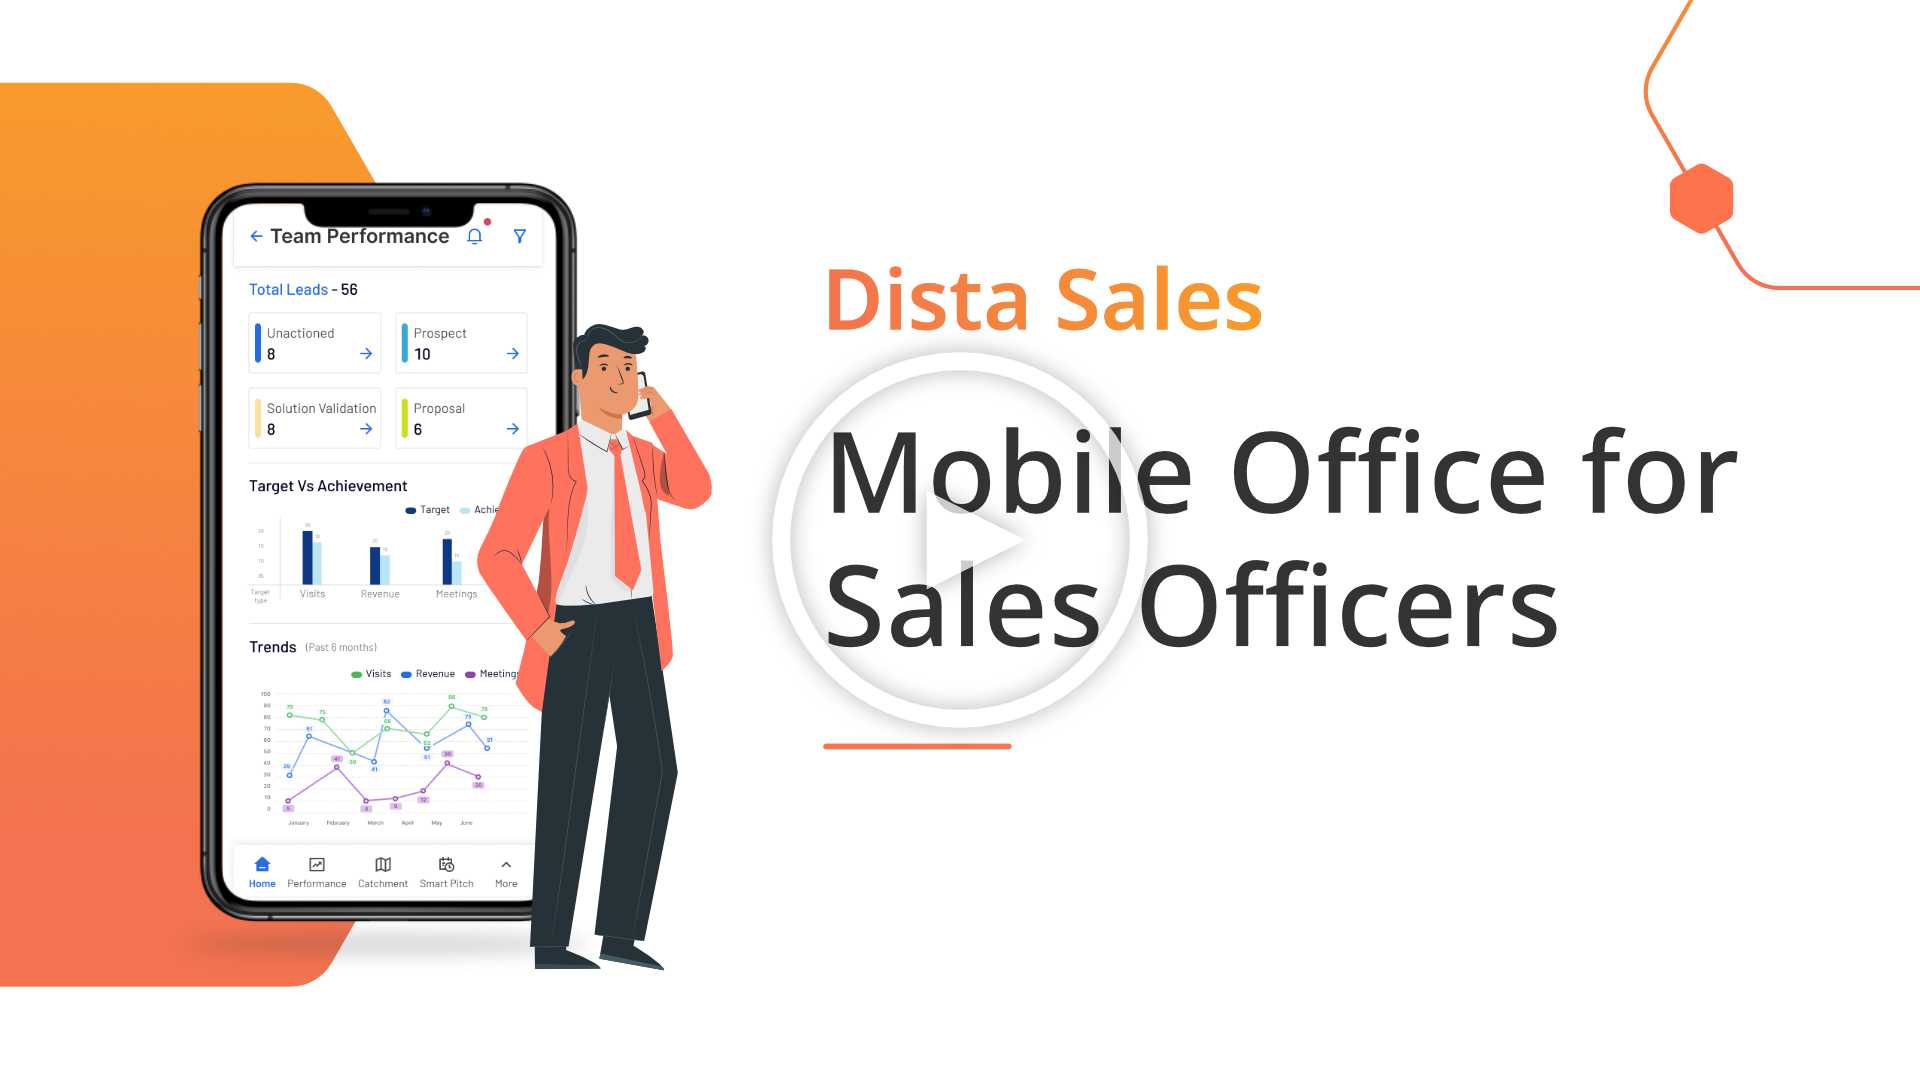 A True Mobile Office for Sales Officers - Dista Sales